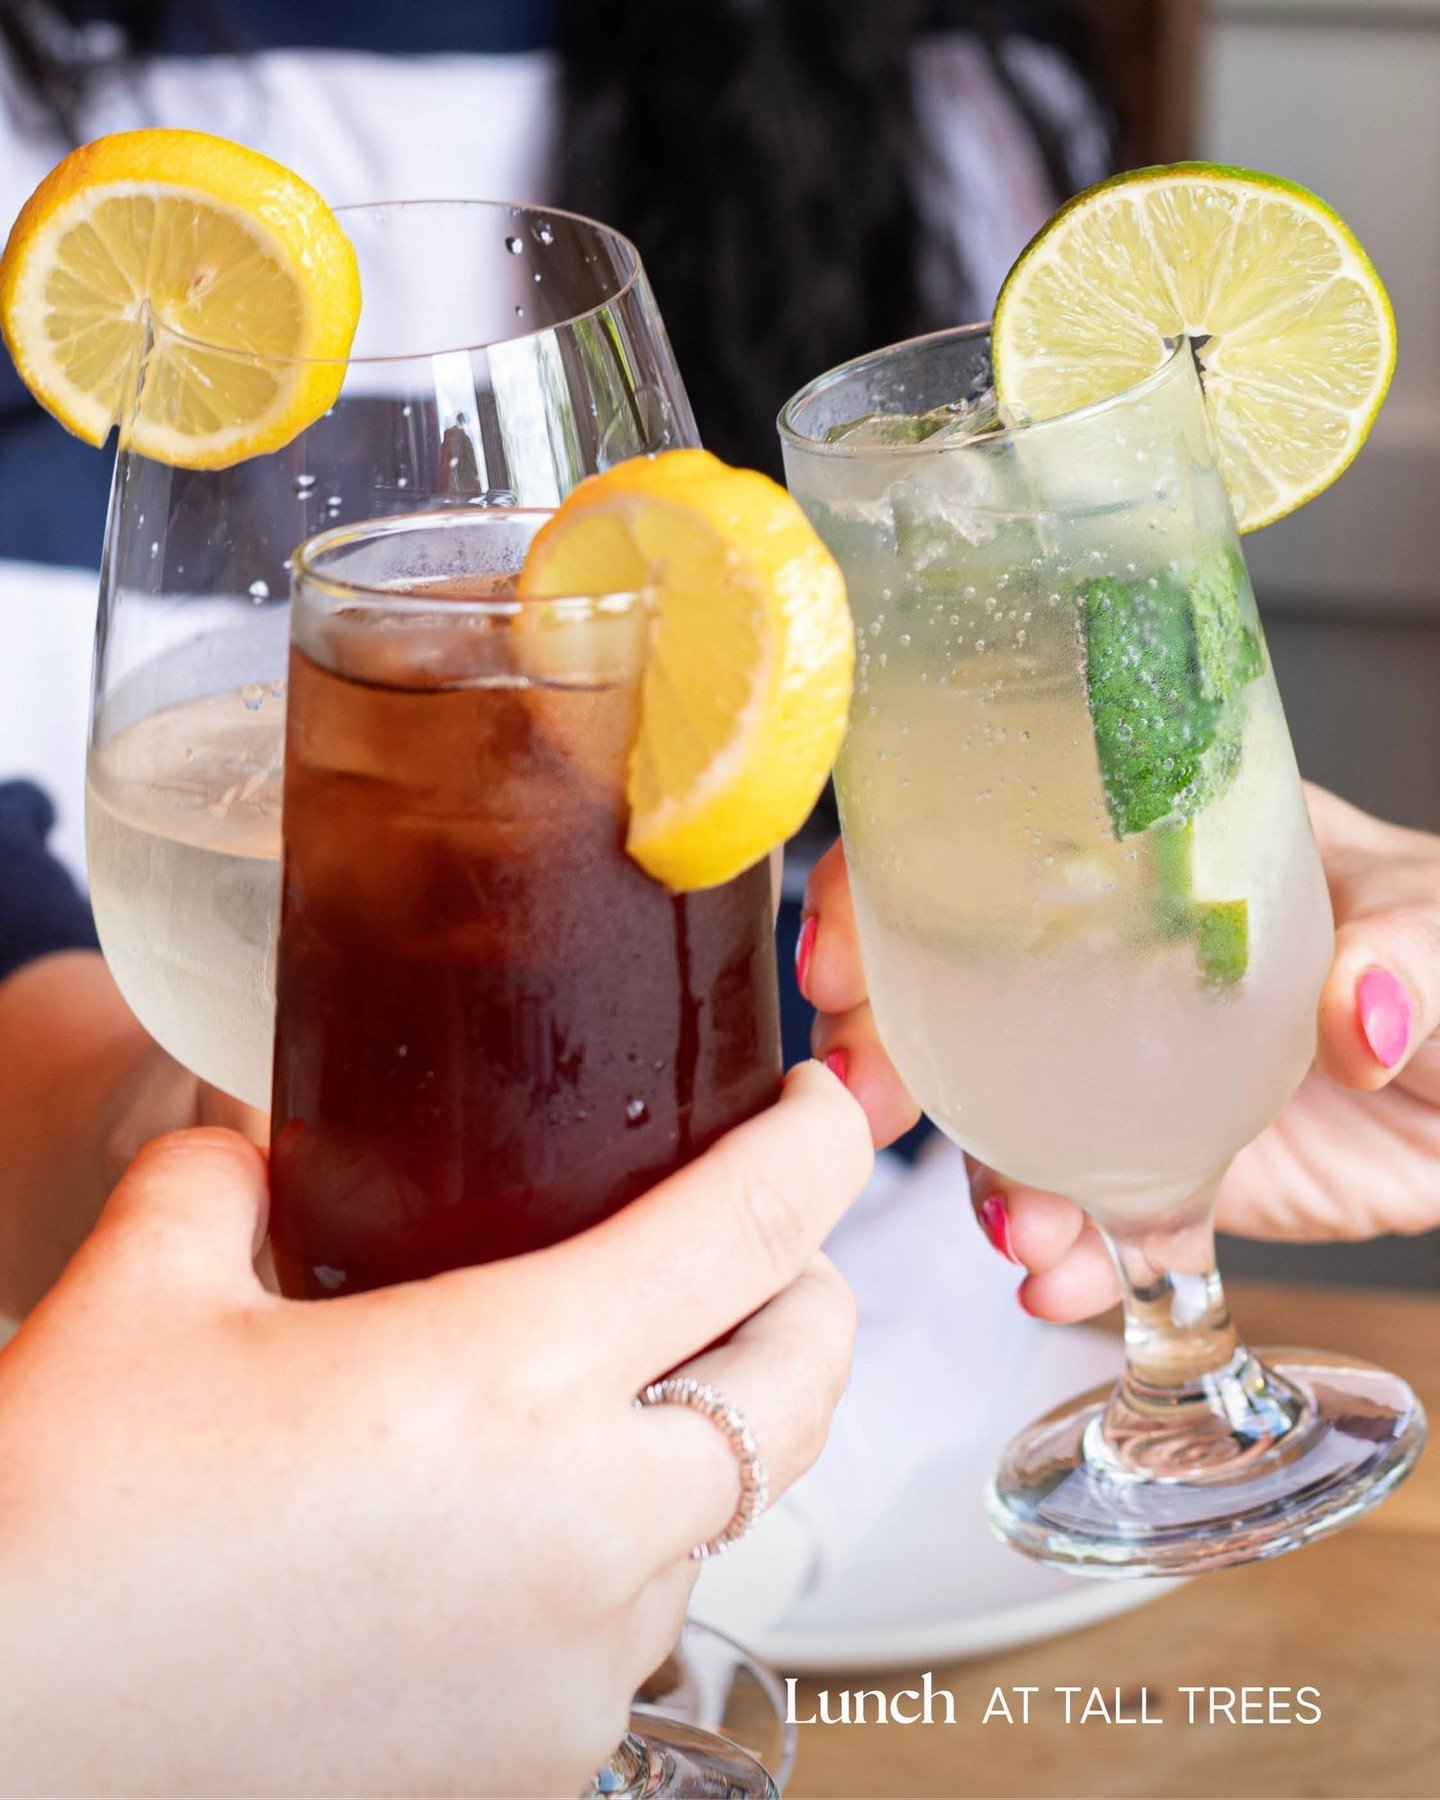 Raising our glasses to another delicious afternoon in good company! 🍹🍸#ClinkClink

Reserve your table online: Link in bio &uarr; 

📍 Tall Trees is located at 87 Main St W, Huntsville
📲 (705) 789-9769

#Cocktails #CocktailHour #Restaurant #Huntsvi